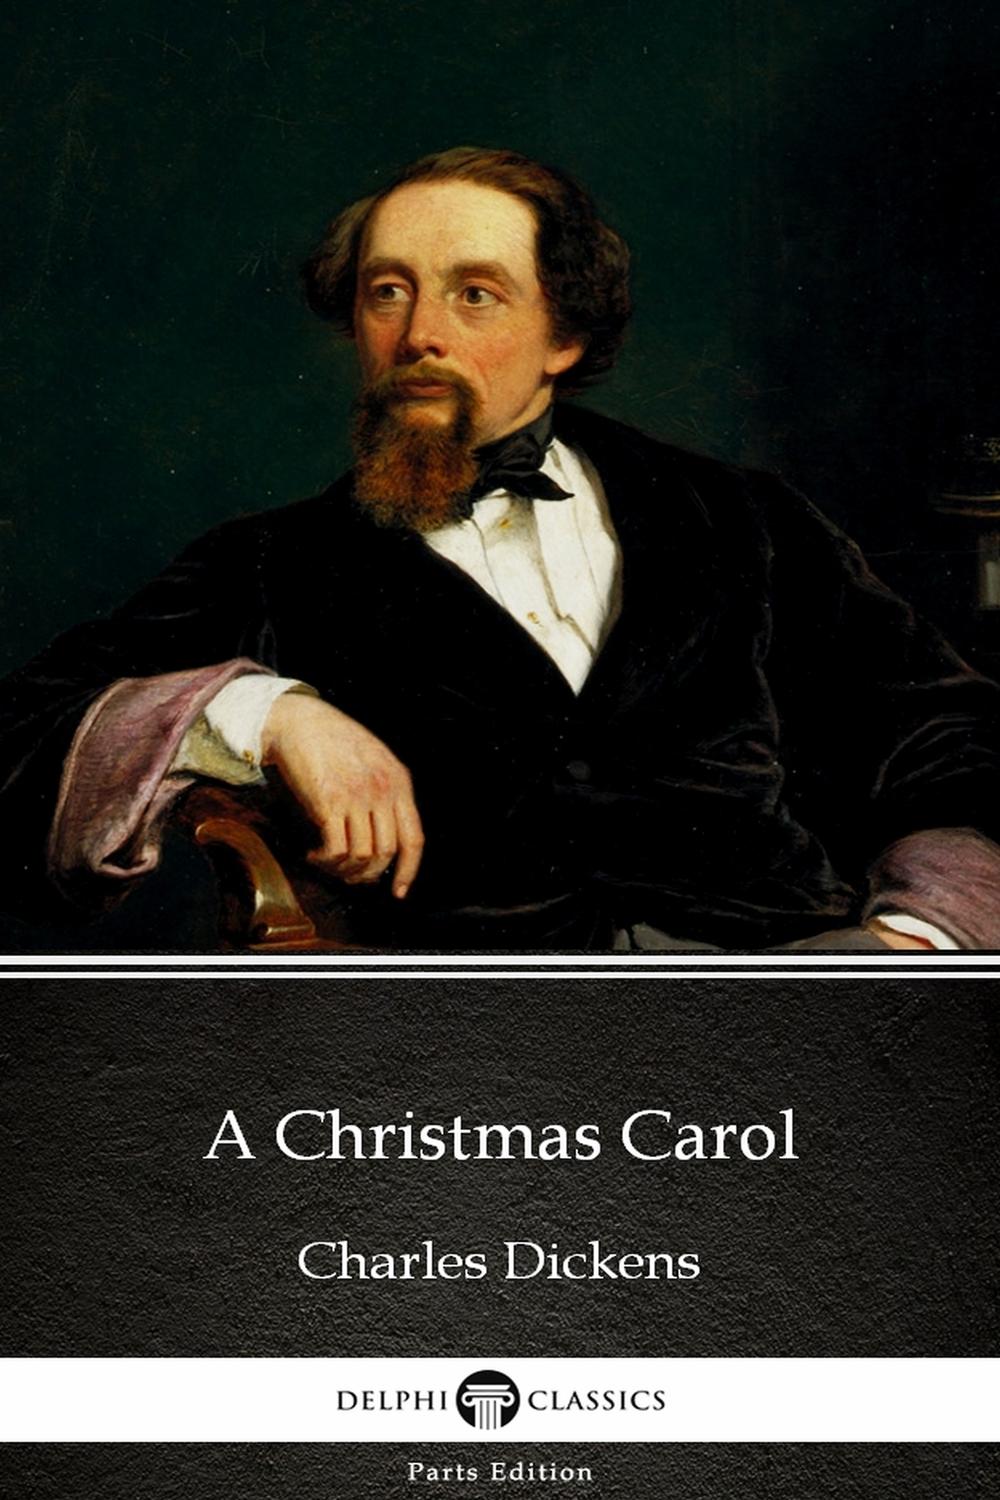 A Christmas Carol by Charles Dickens (Illustrated) - Charles Dickens,,Delphi Classics